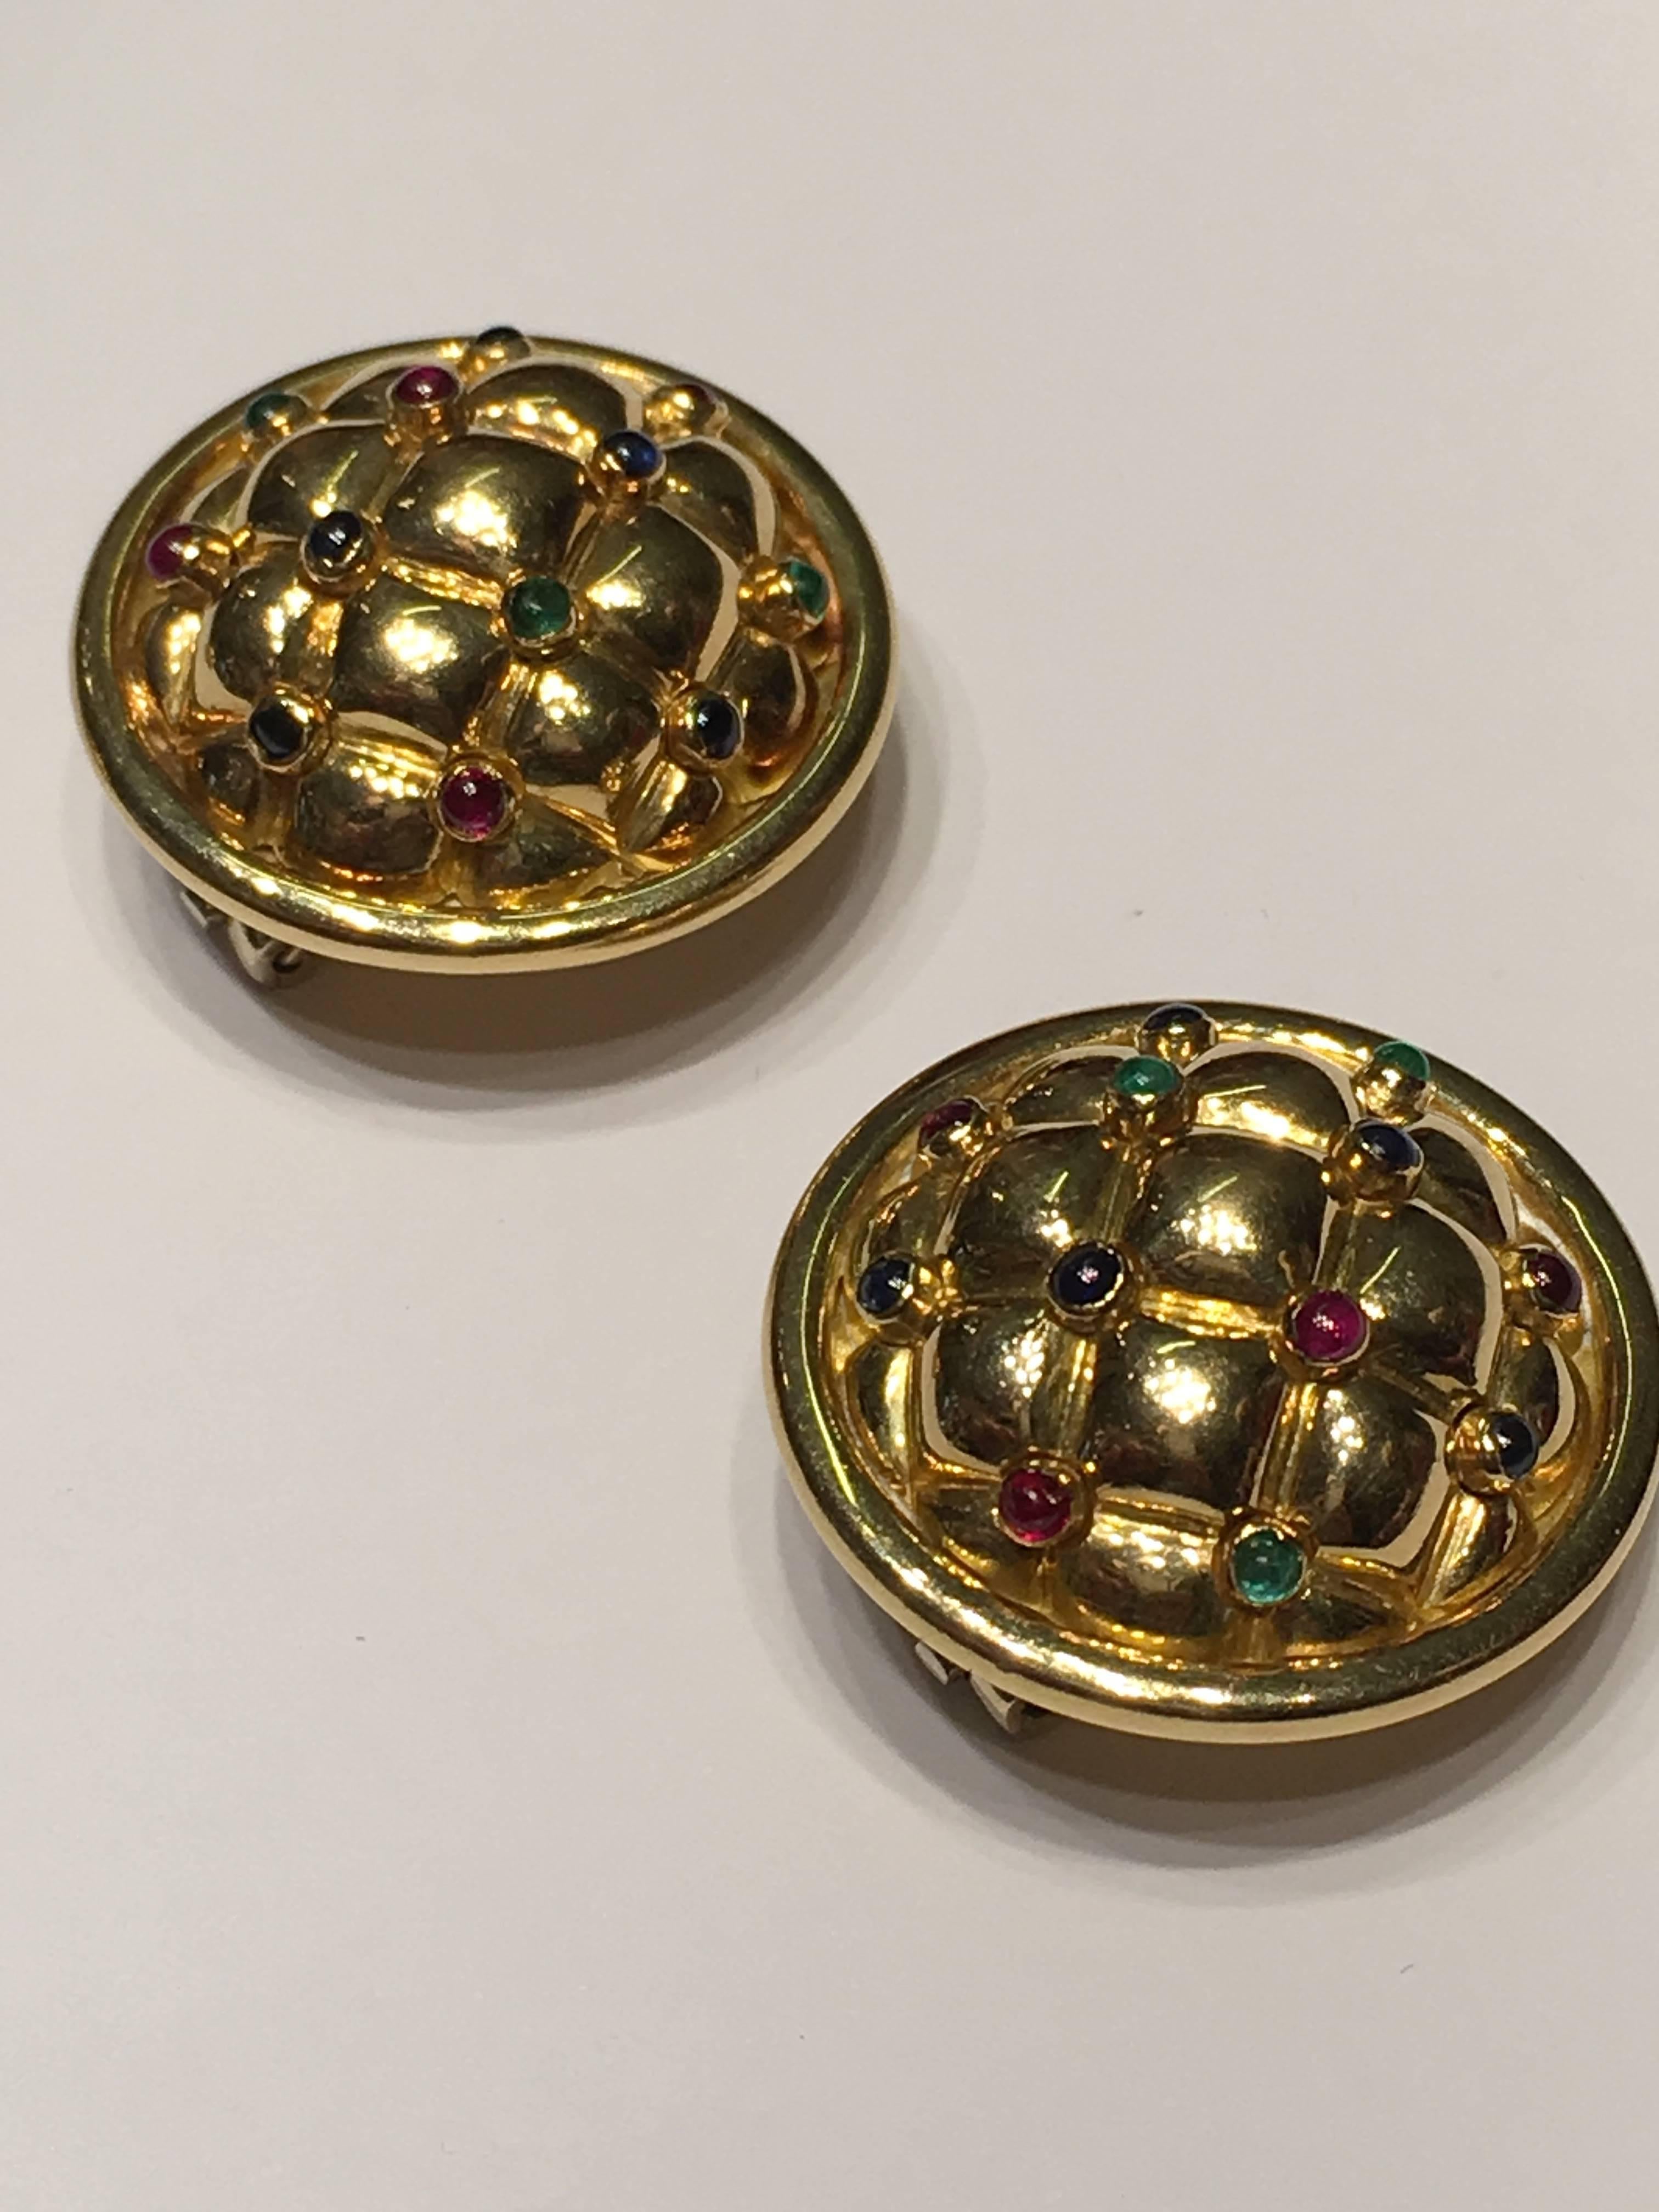 Chaumet Cushion Earrings set with Cabouchon Emeralds, Sapphires and Rubies
set in 18ct Yellow gold with a clip on fitting suiable for non pierced ears.
We can at no extra charge add pins to the earring fittings.
Fully signed by